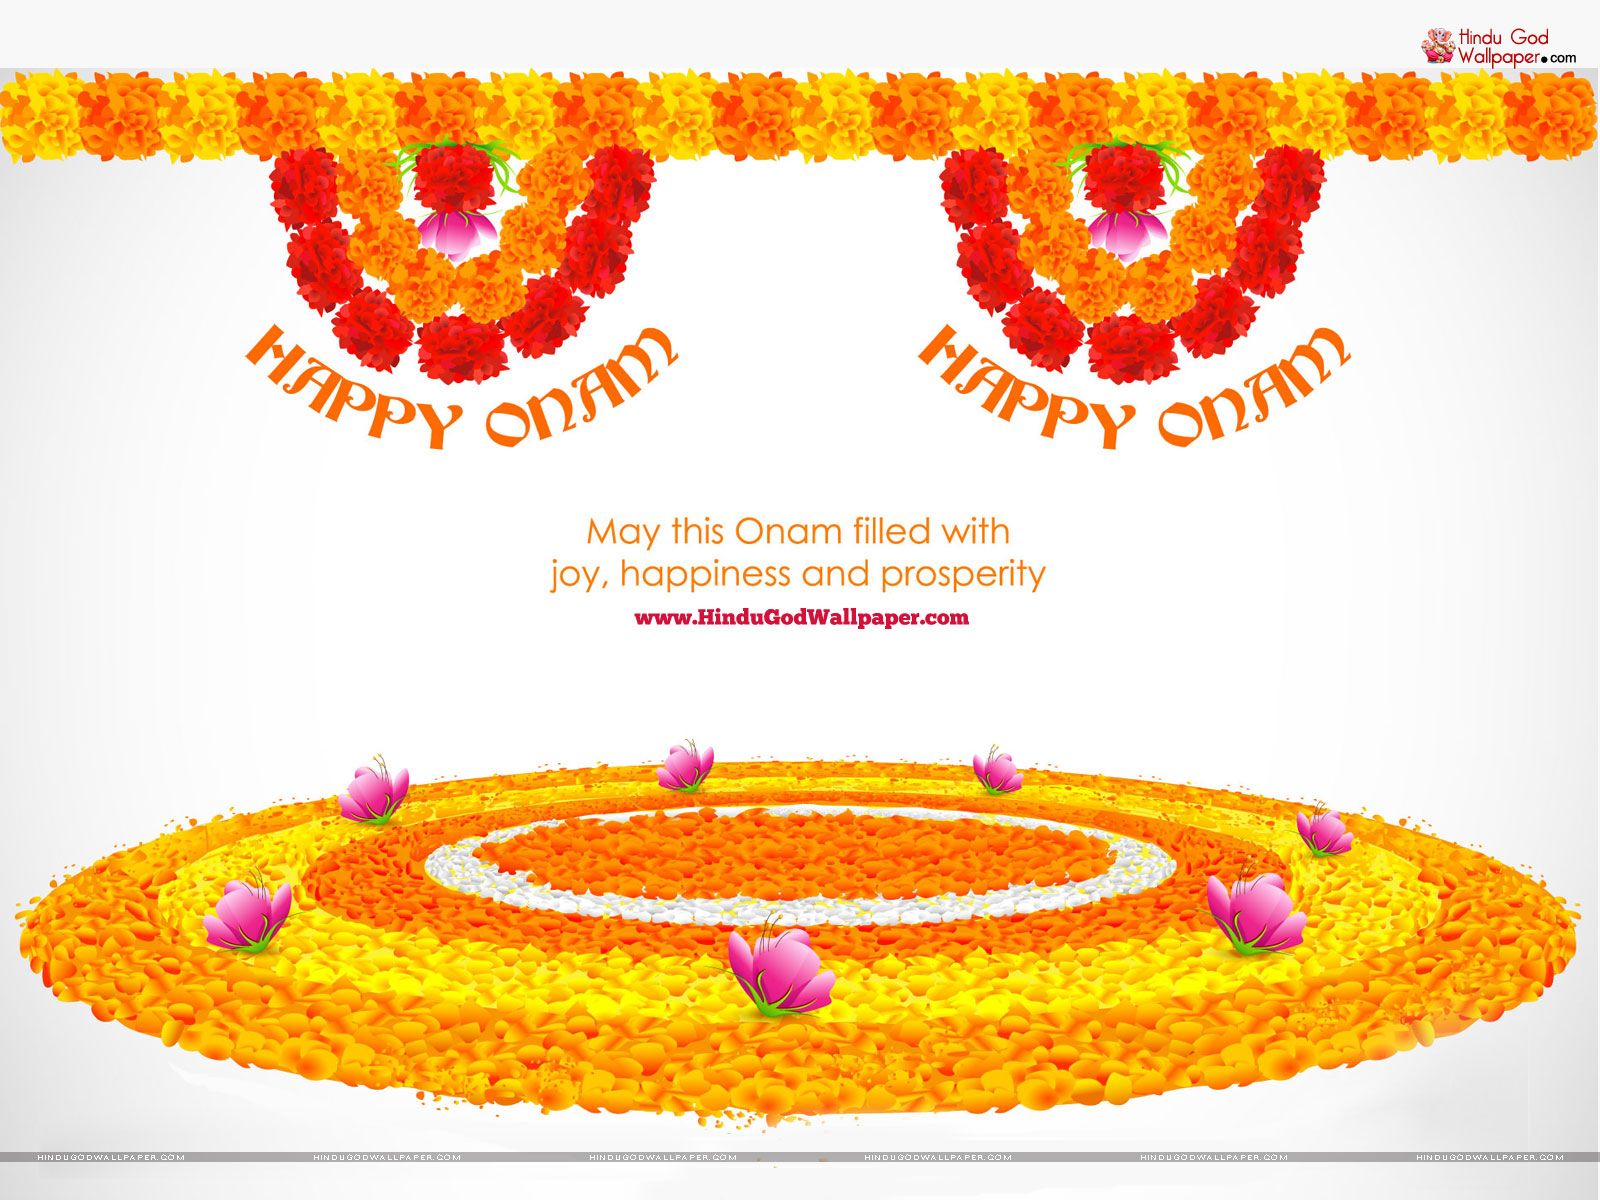 Onam Pookalam Wallpapers & Pictures HD Free Download | Onam ...